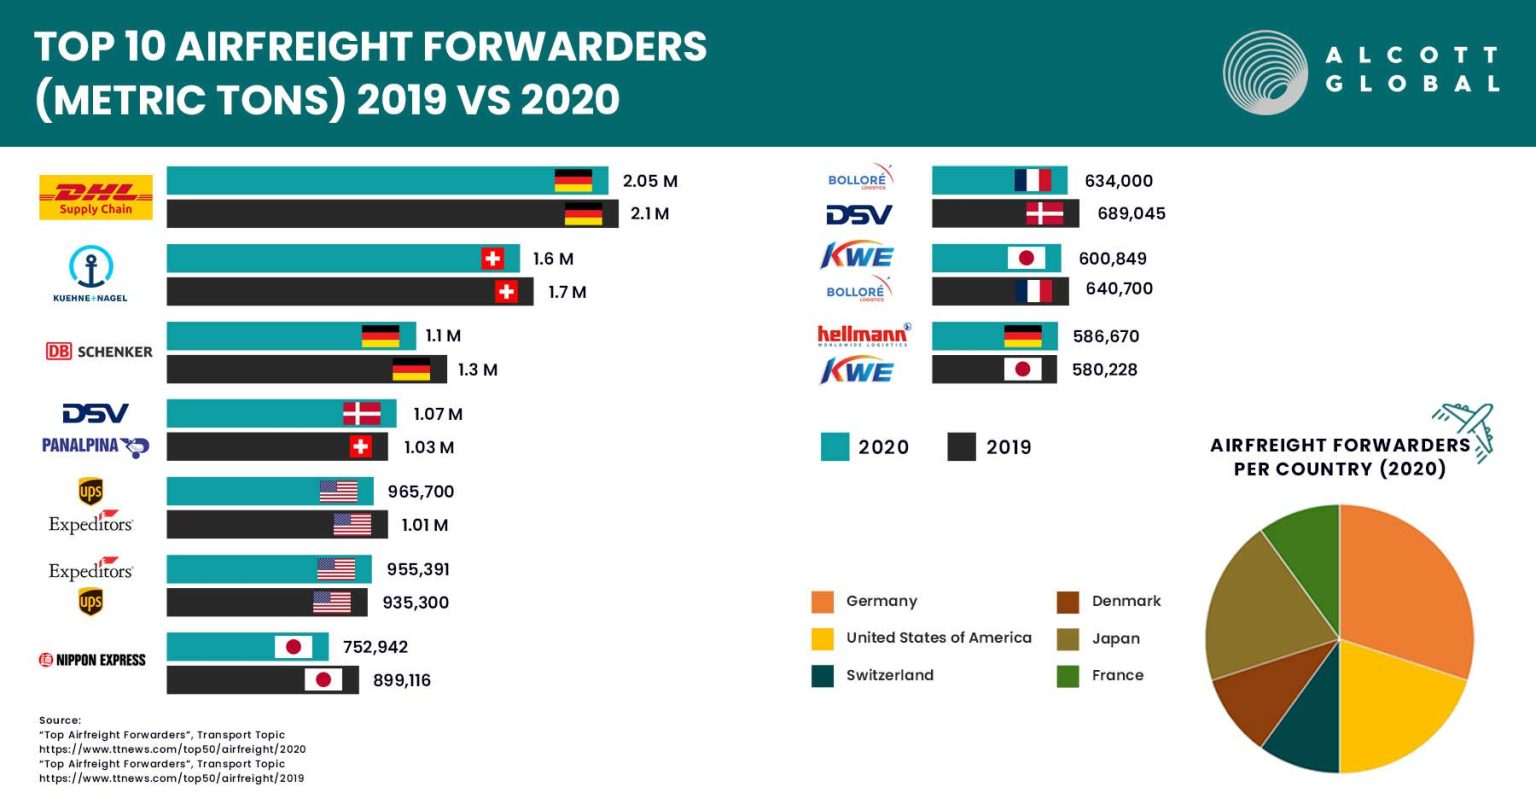 Top 10 Airfreight Forwarders 2020 vs. 2019 Alcott Global